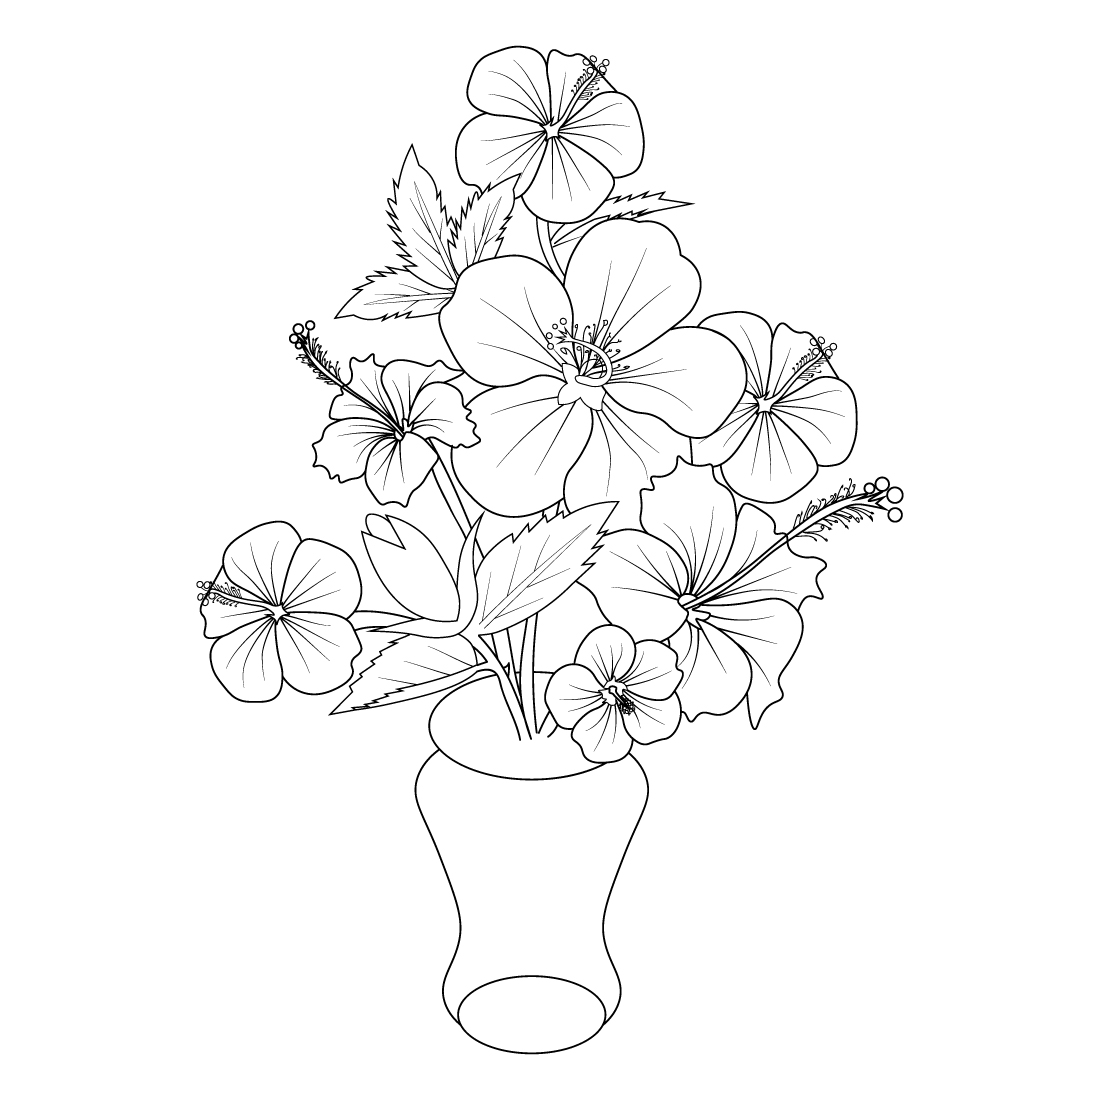 Hibiscus flower coloring pages china rose flower drawing, Realistic hibiscus flower coloring pages cover image.